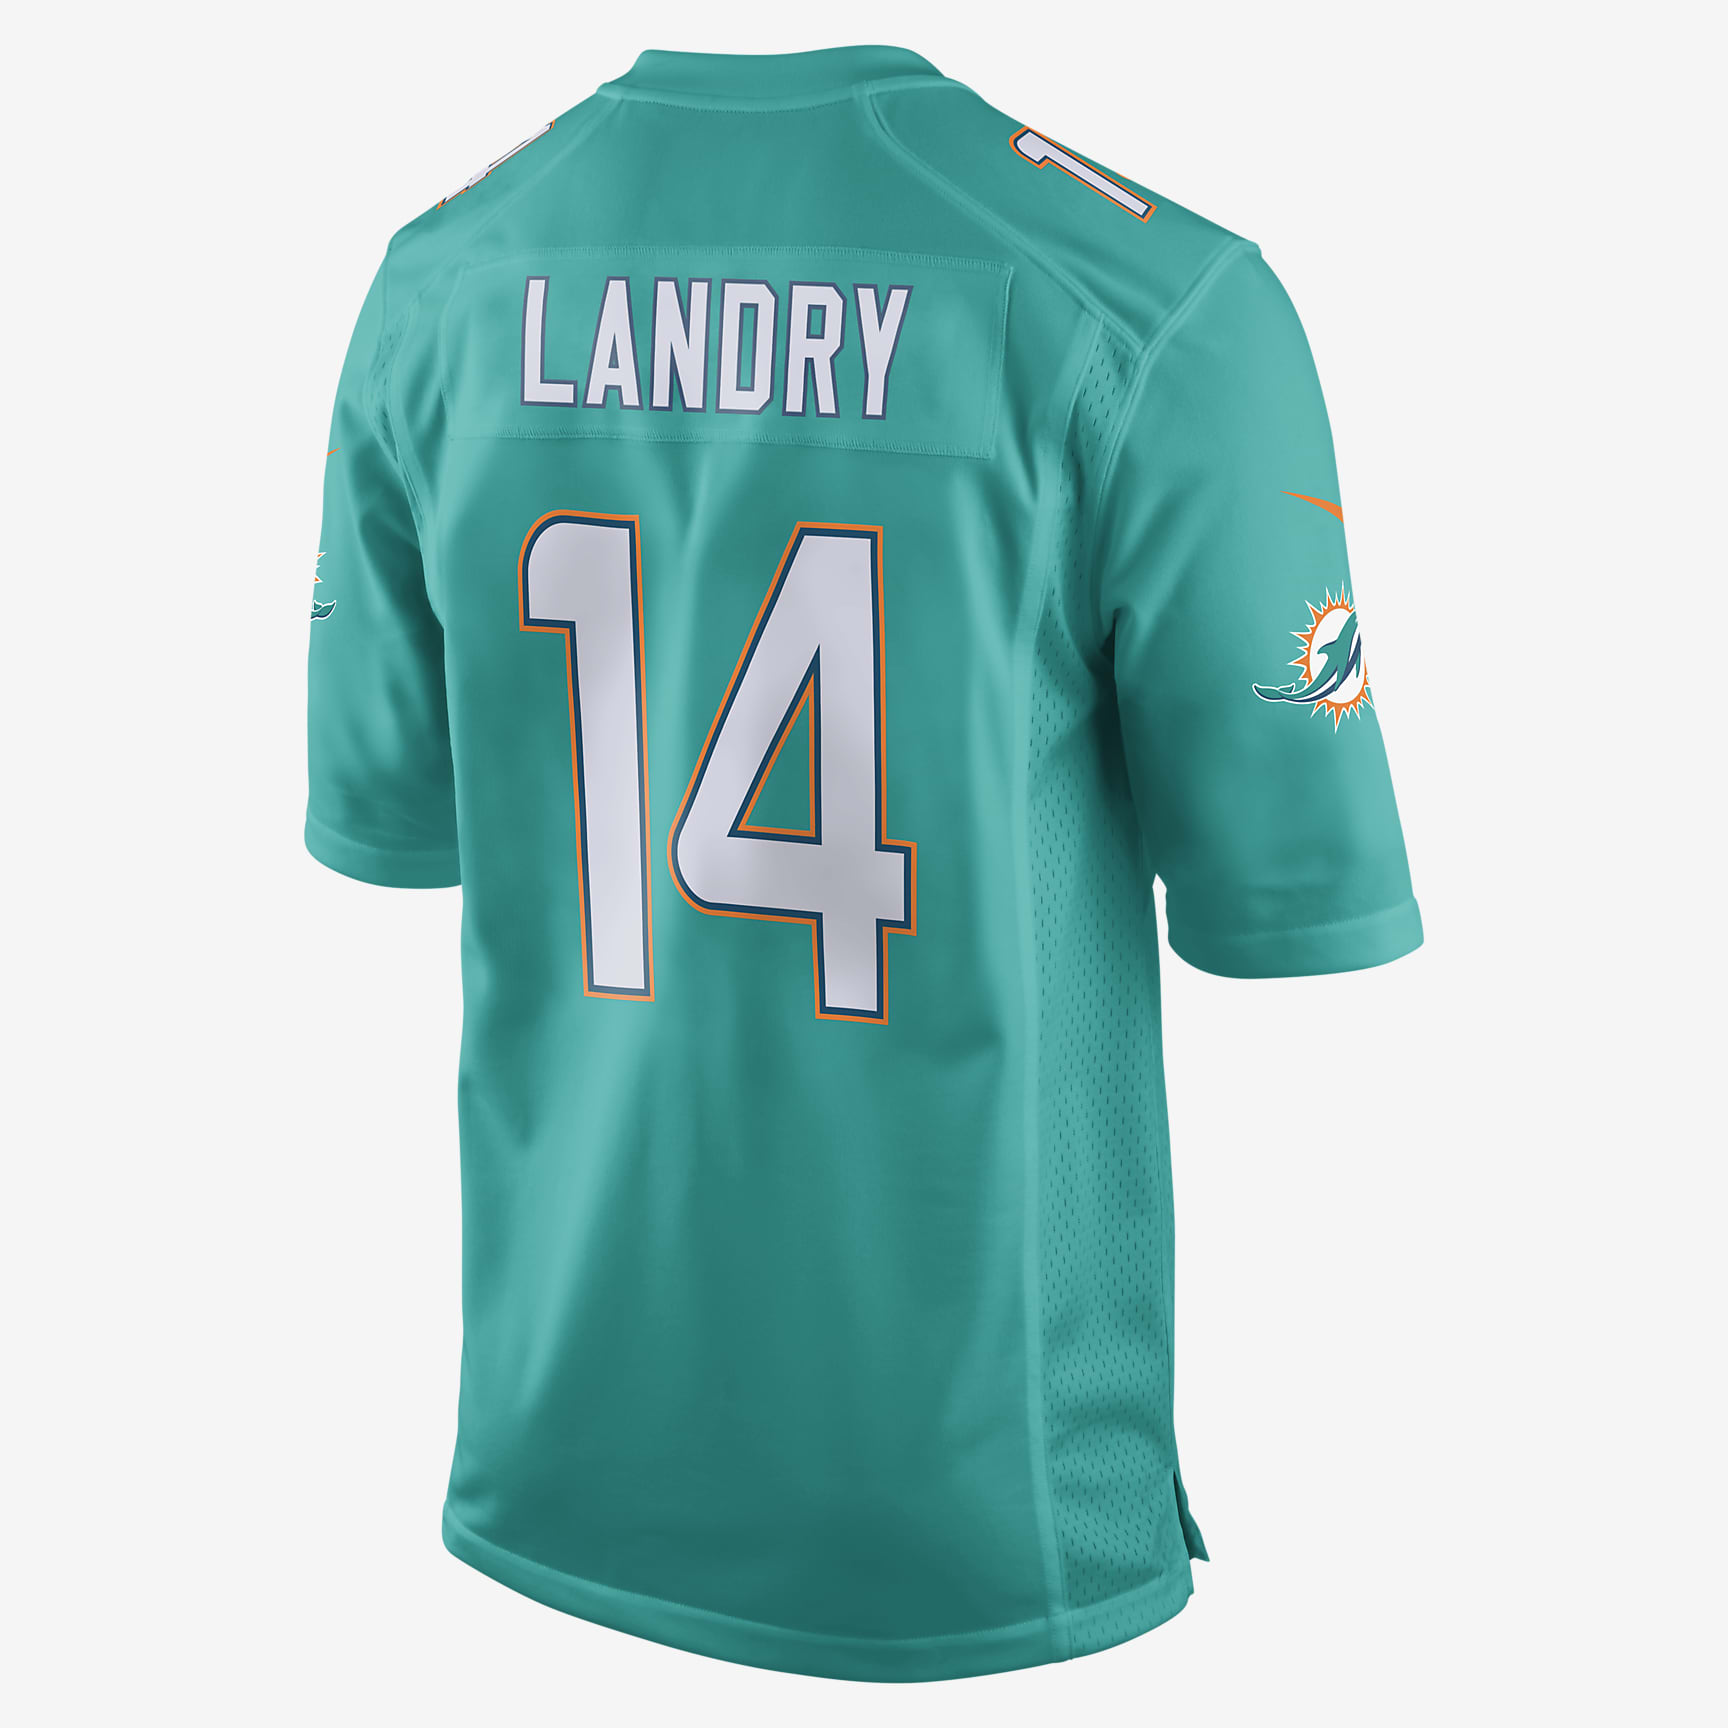 NFL Miami Dolphins (Jarvis Landry) Men's American Football Home Game Jersey. Nike RO